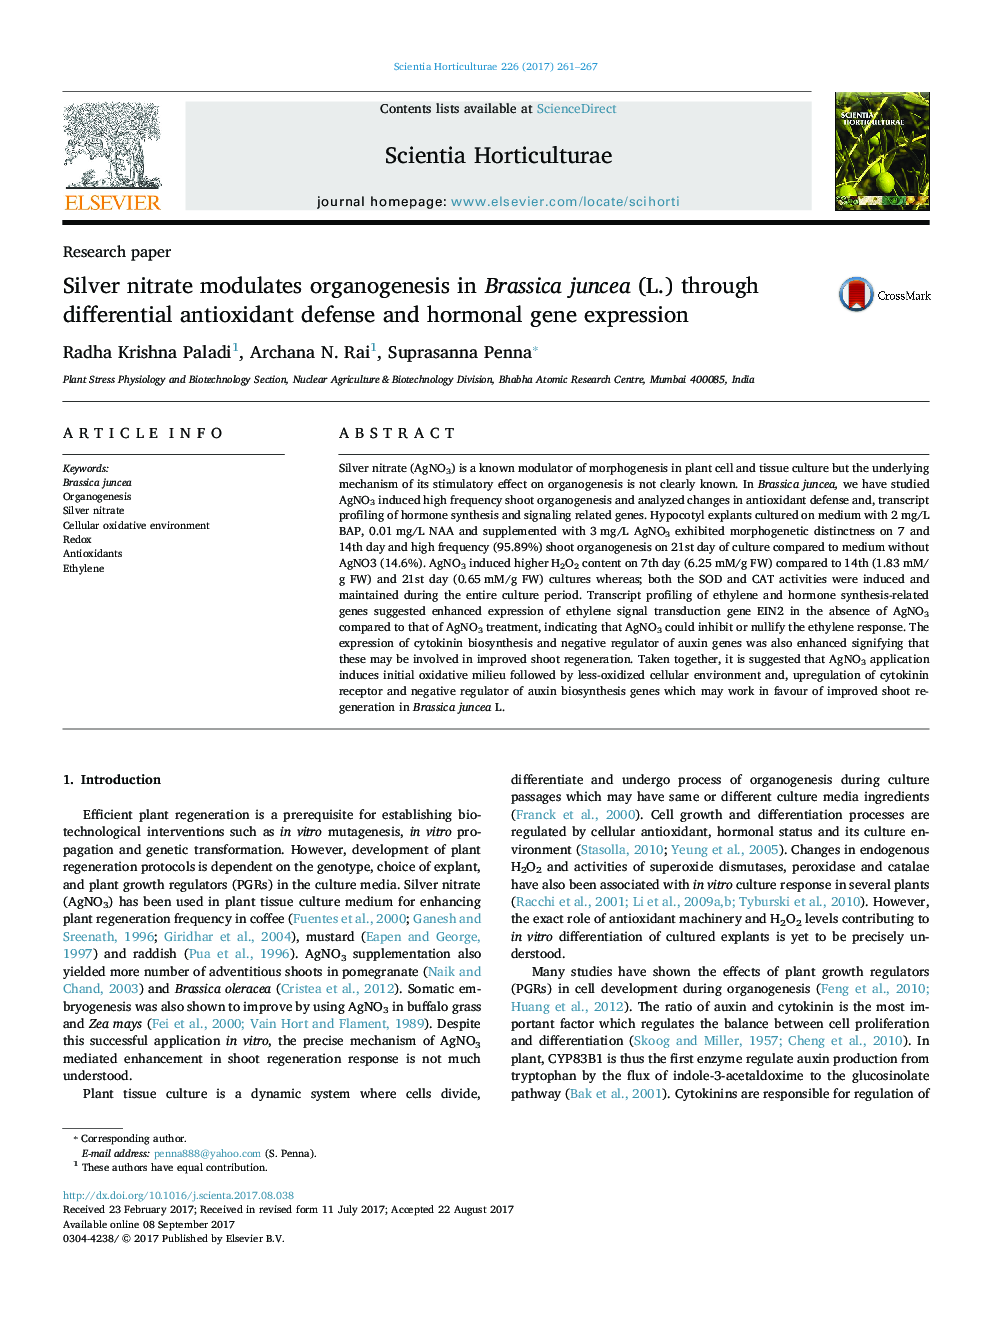 Research paperSilver nitrate modulates organogenesis in Brassica juncea (L.) through differential antioxidant defense and hormonal gene expression